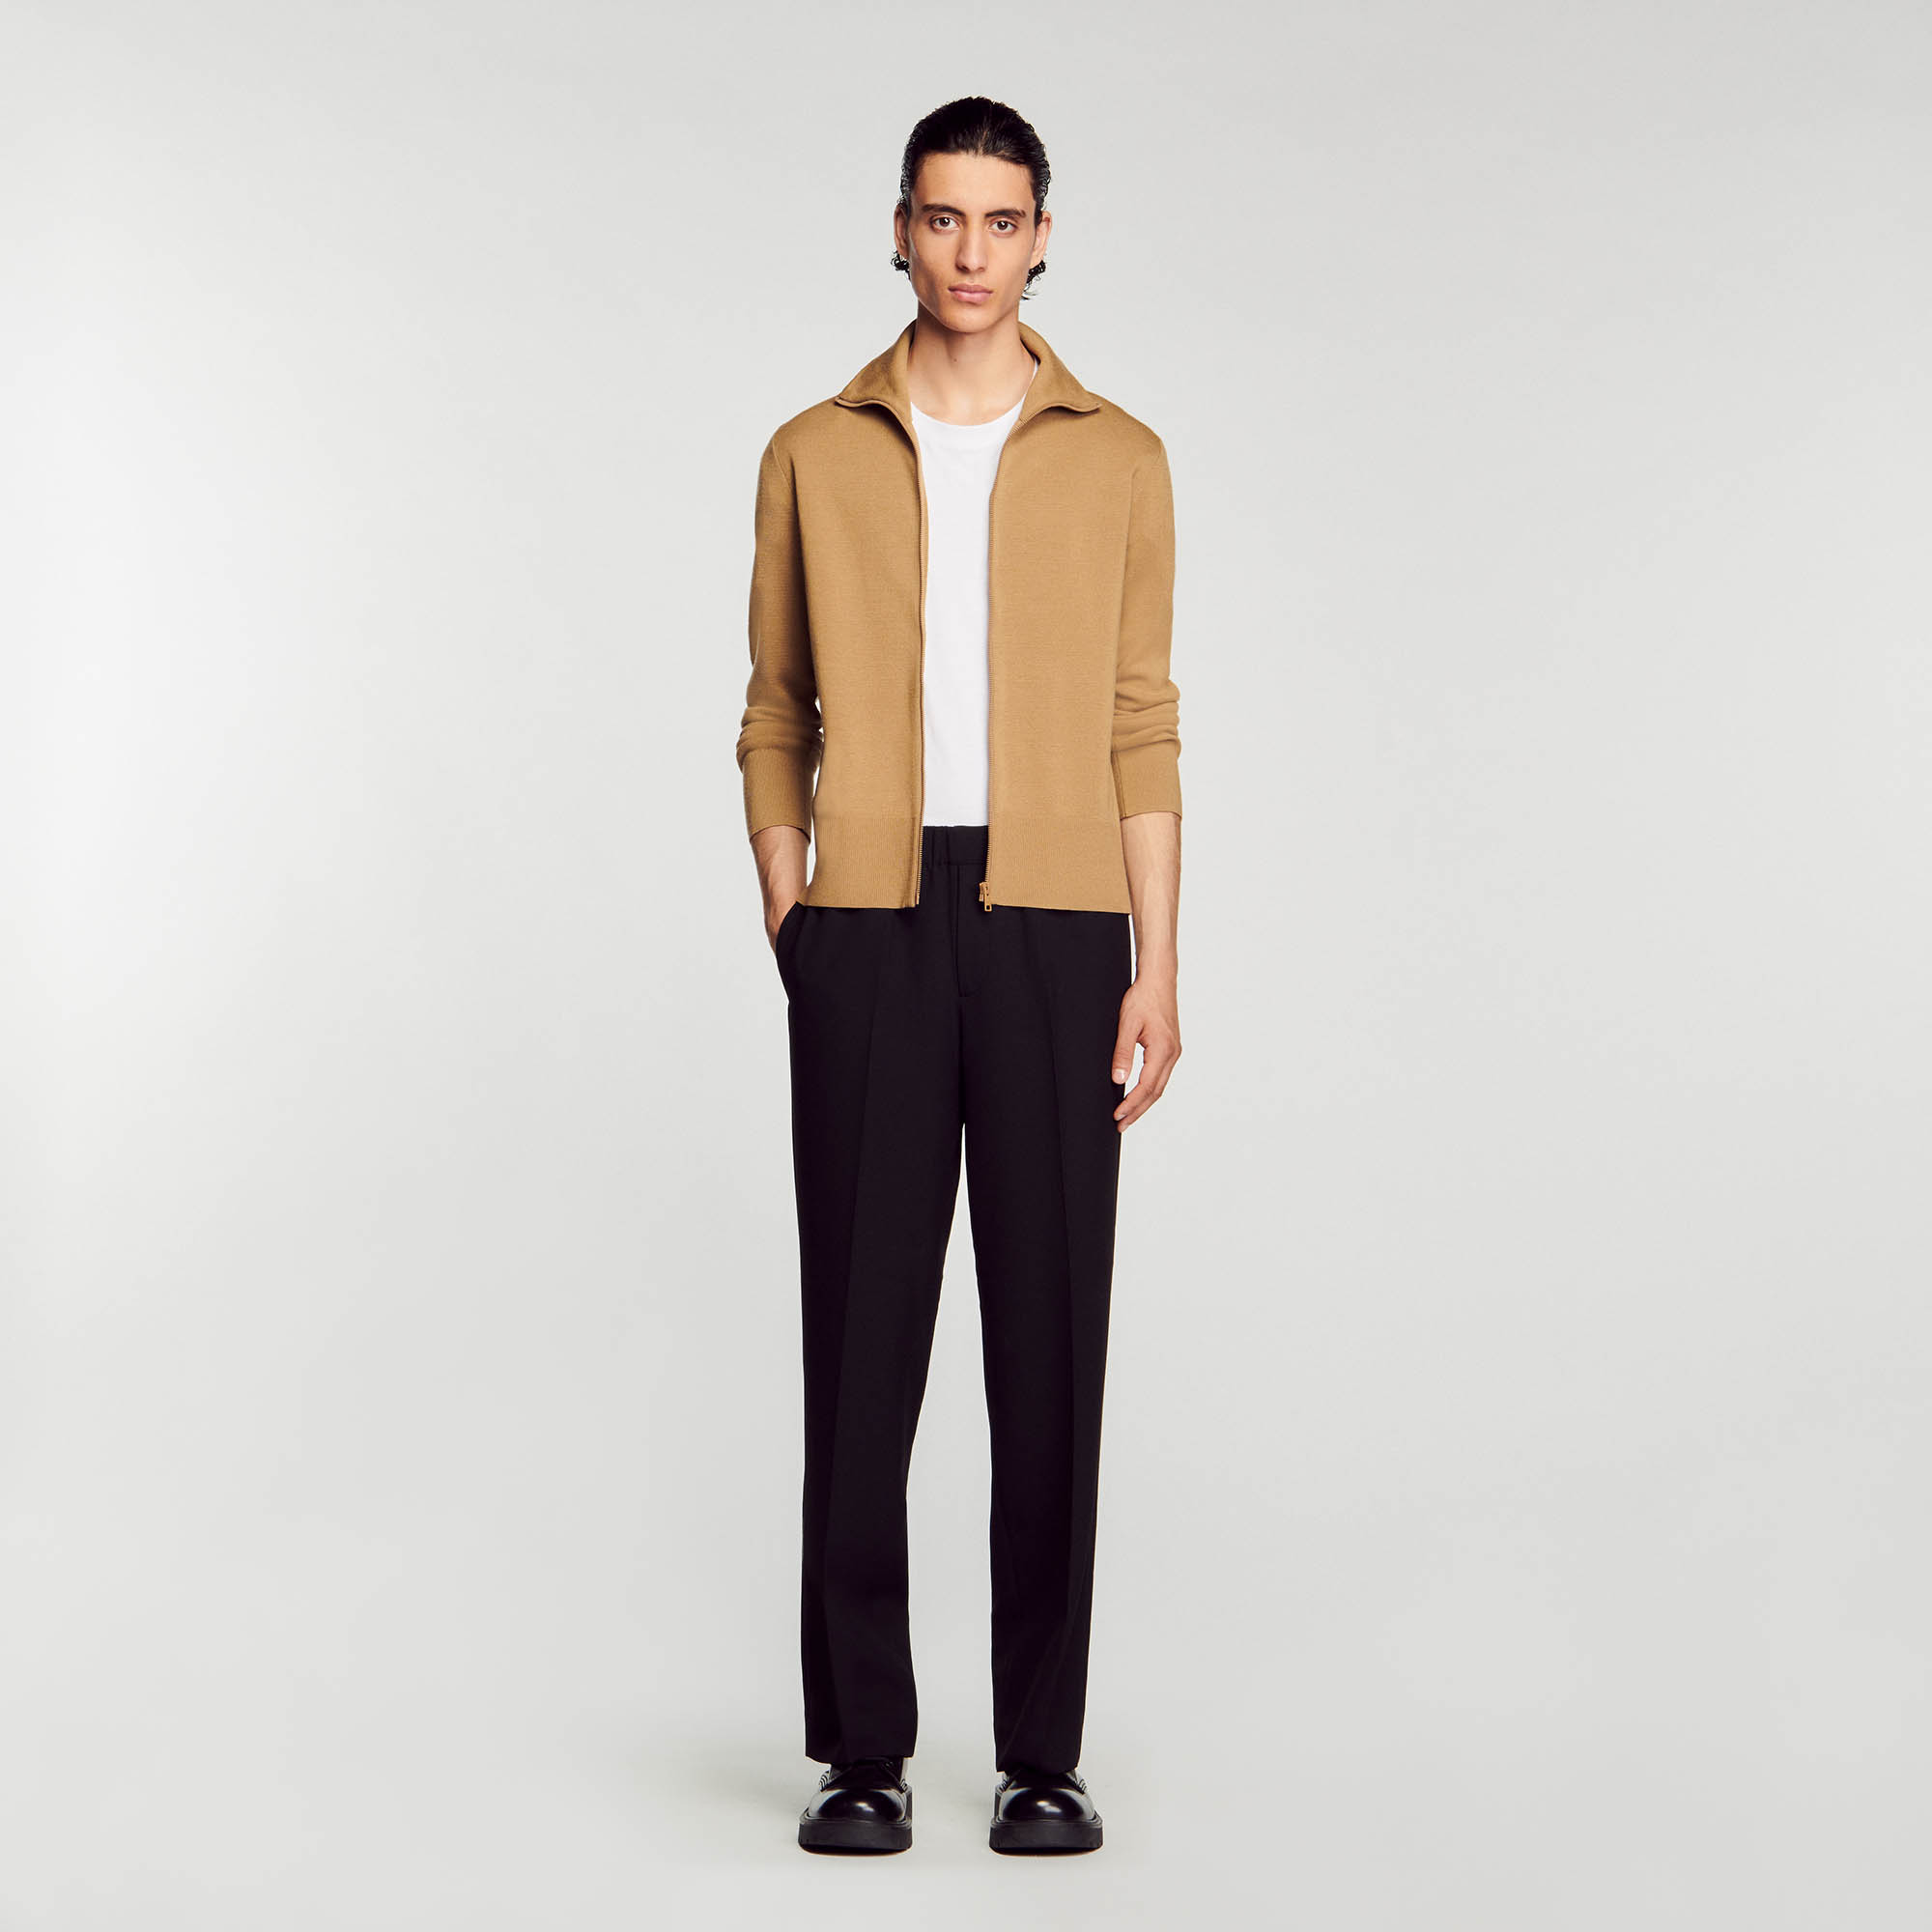 Sandro wool Sandro men's cardigan â€¢ Wool cardigan â€¢ High neck â€¢ Zip fastening on the front â€¢ Long sleeves â€¢ Ribbed trim finish The wool in this item comes from extensive farming, which respects animal welfare and contributes to the preservation of local biodiversity